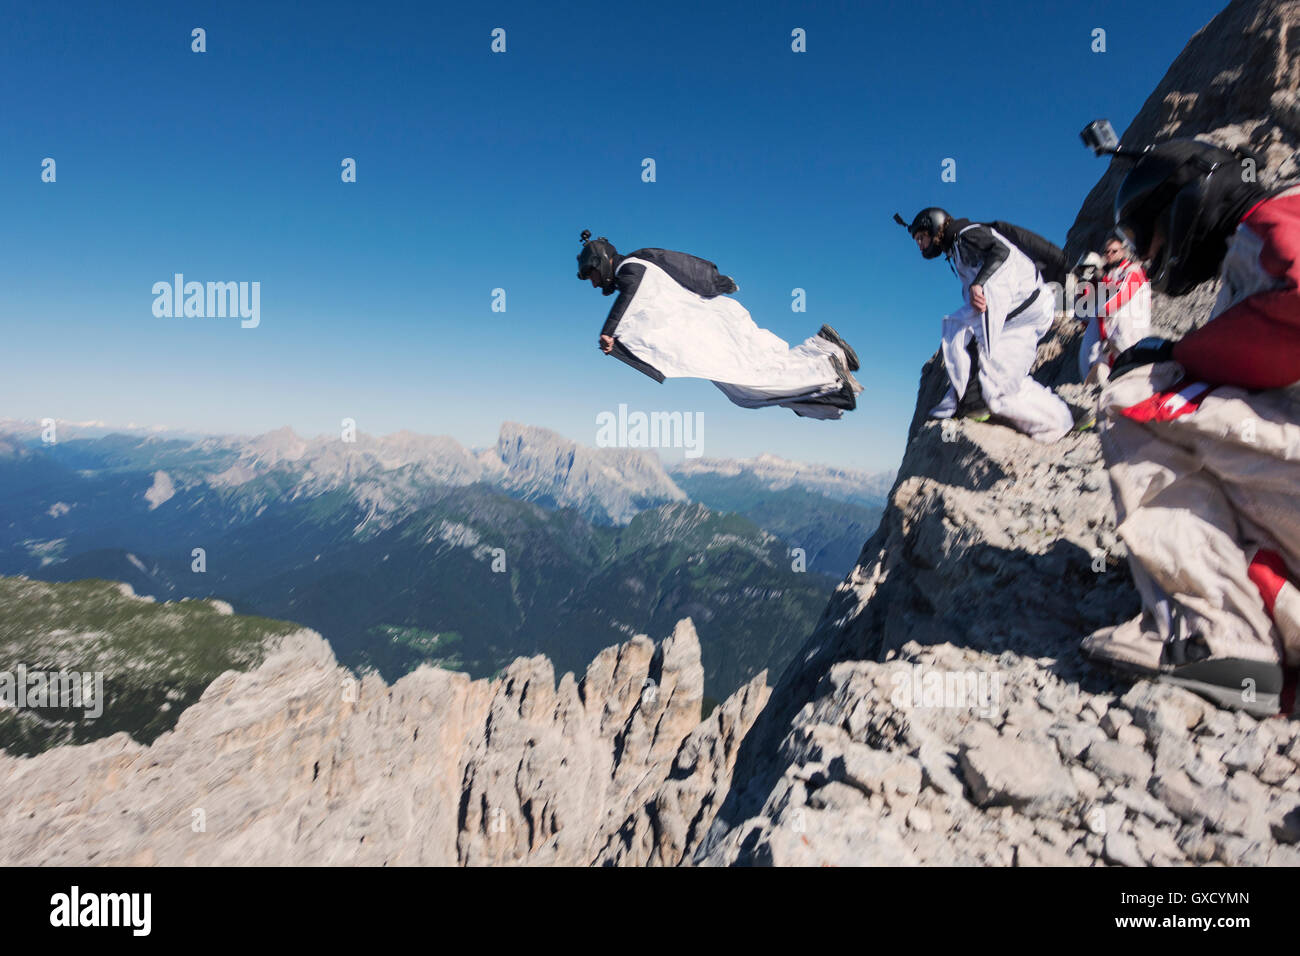 Wingsuit BASE jumping team jumping from cliff, Italian Alps, Alleghe, Belluno, Italy Stock Photo